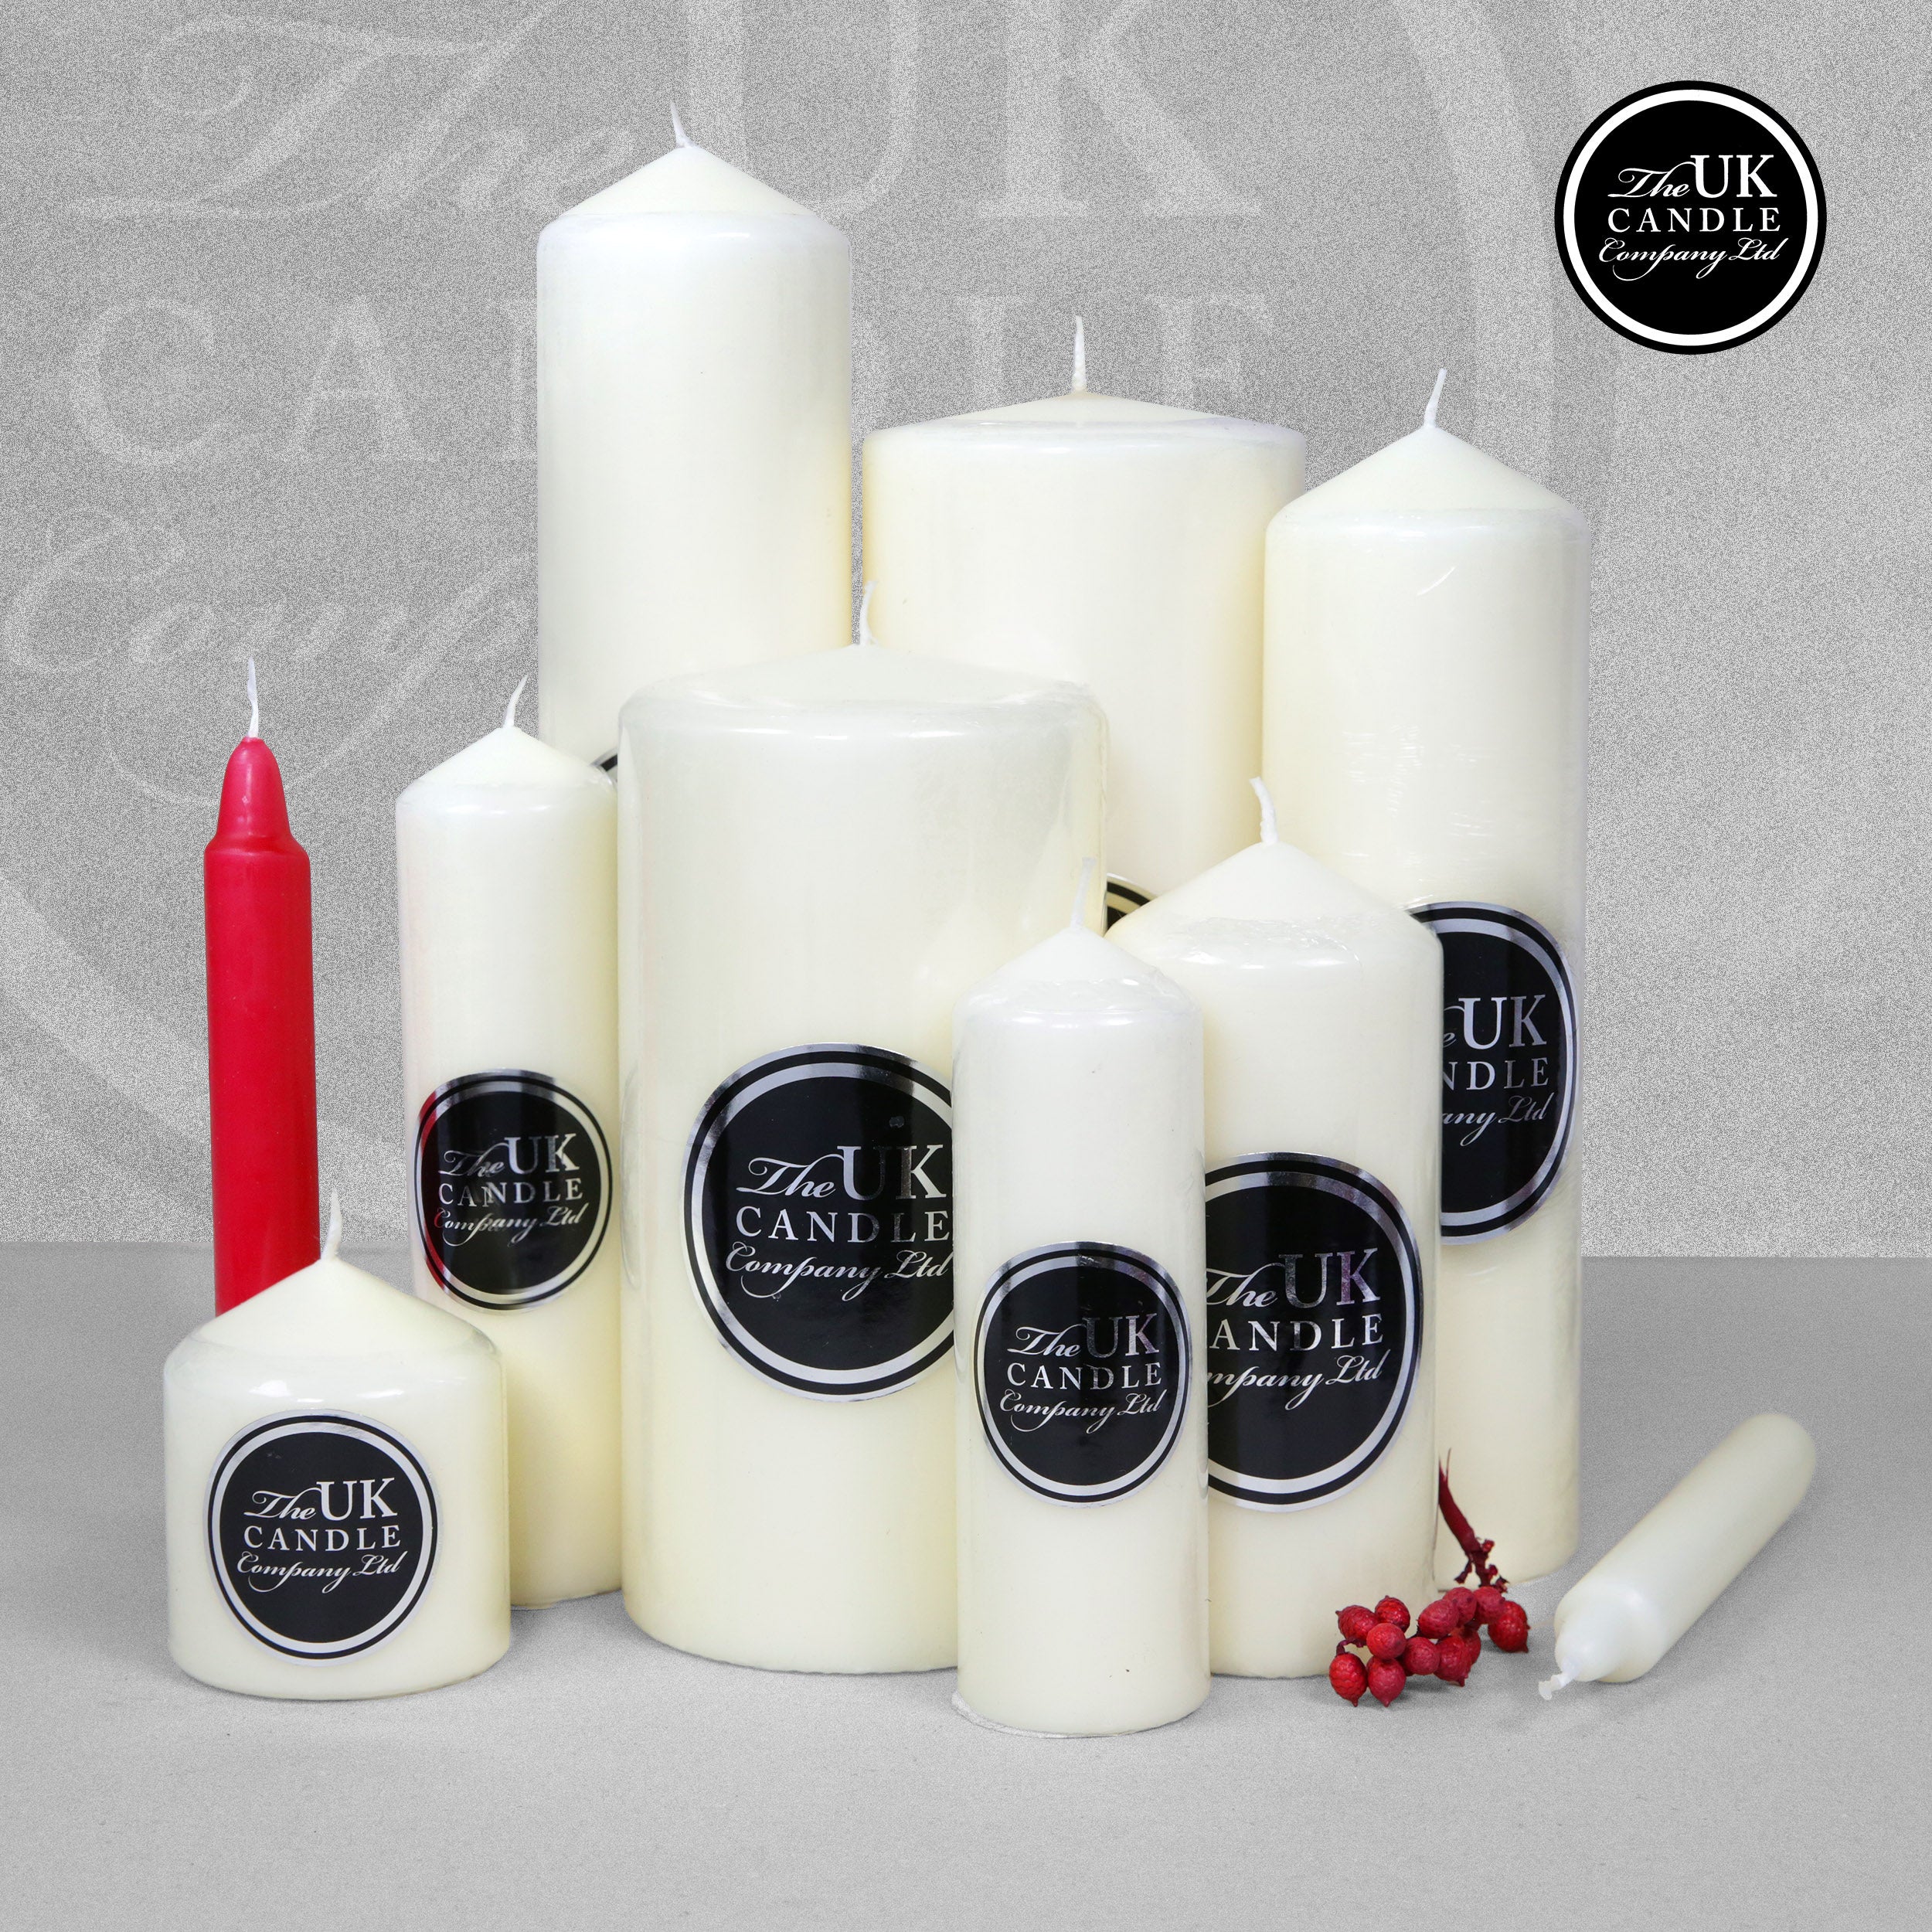 The UK Candle Company Church Pillar Candle 9.8cm x 25cm - Unscented